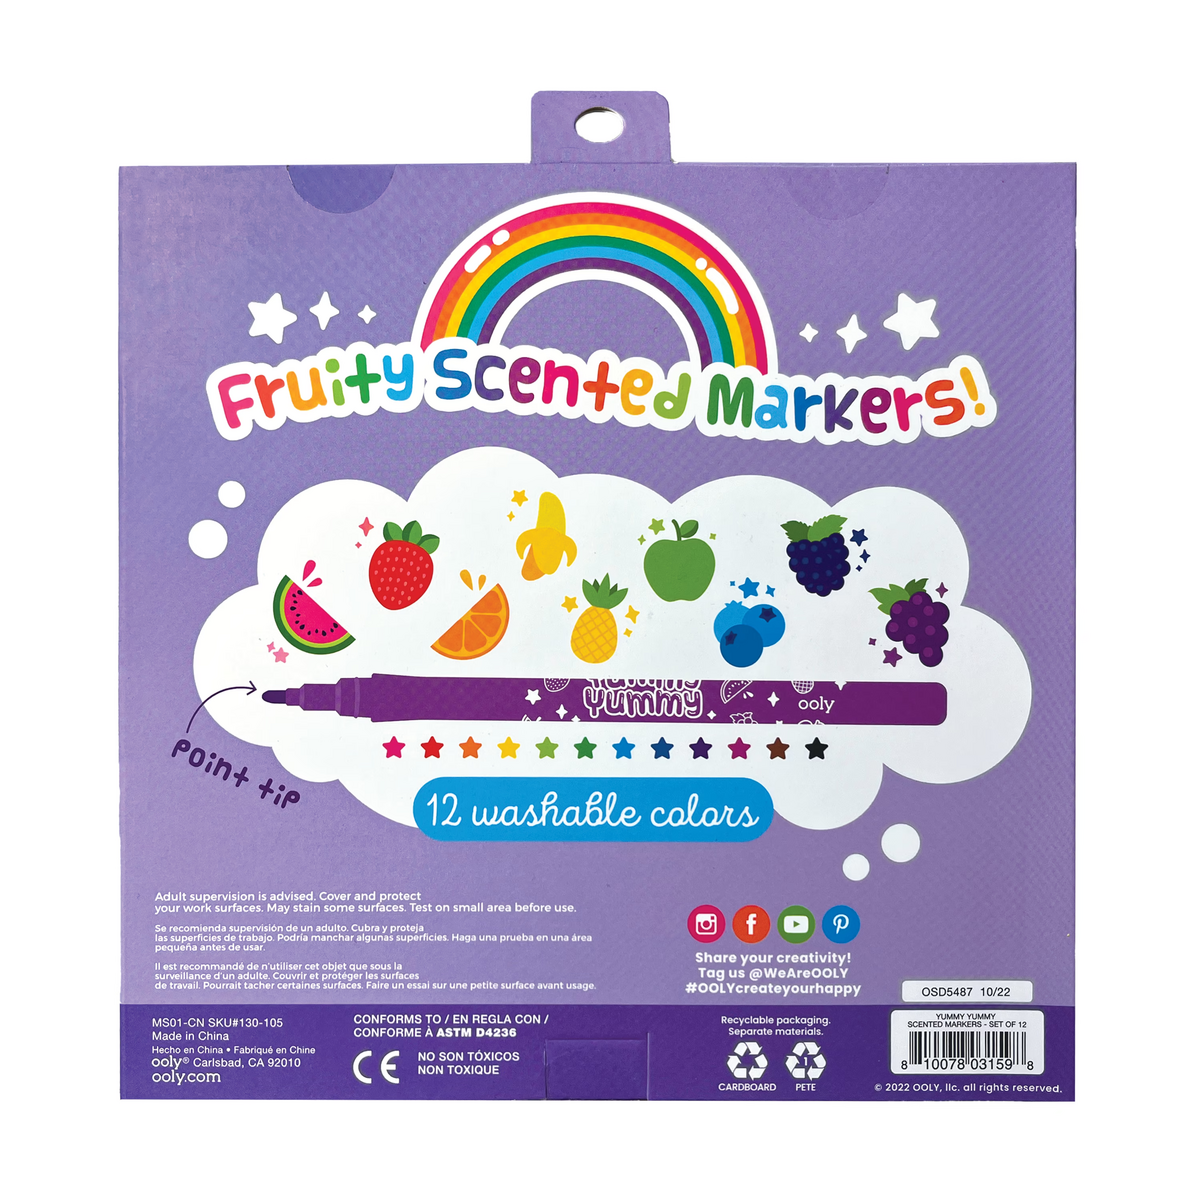 back in the day scented markers